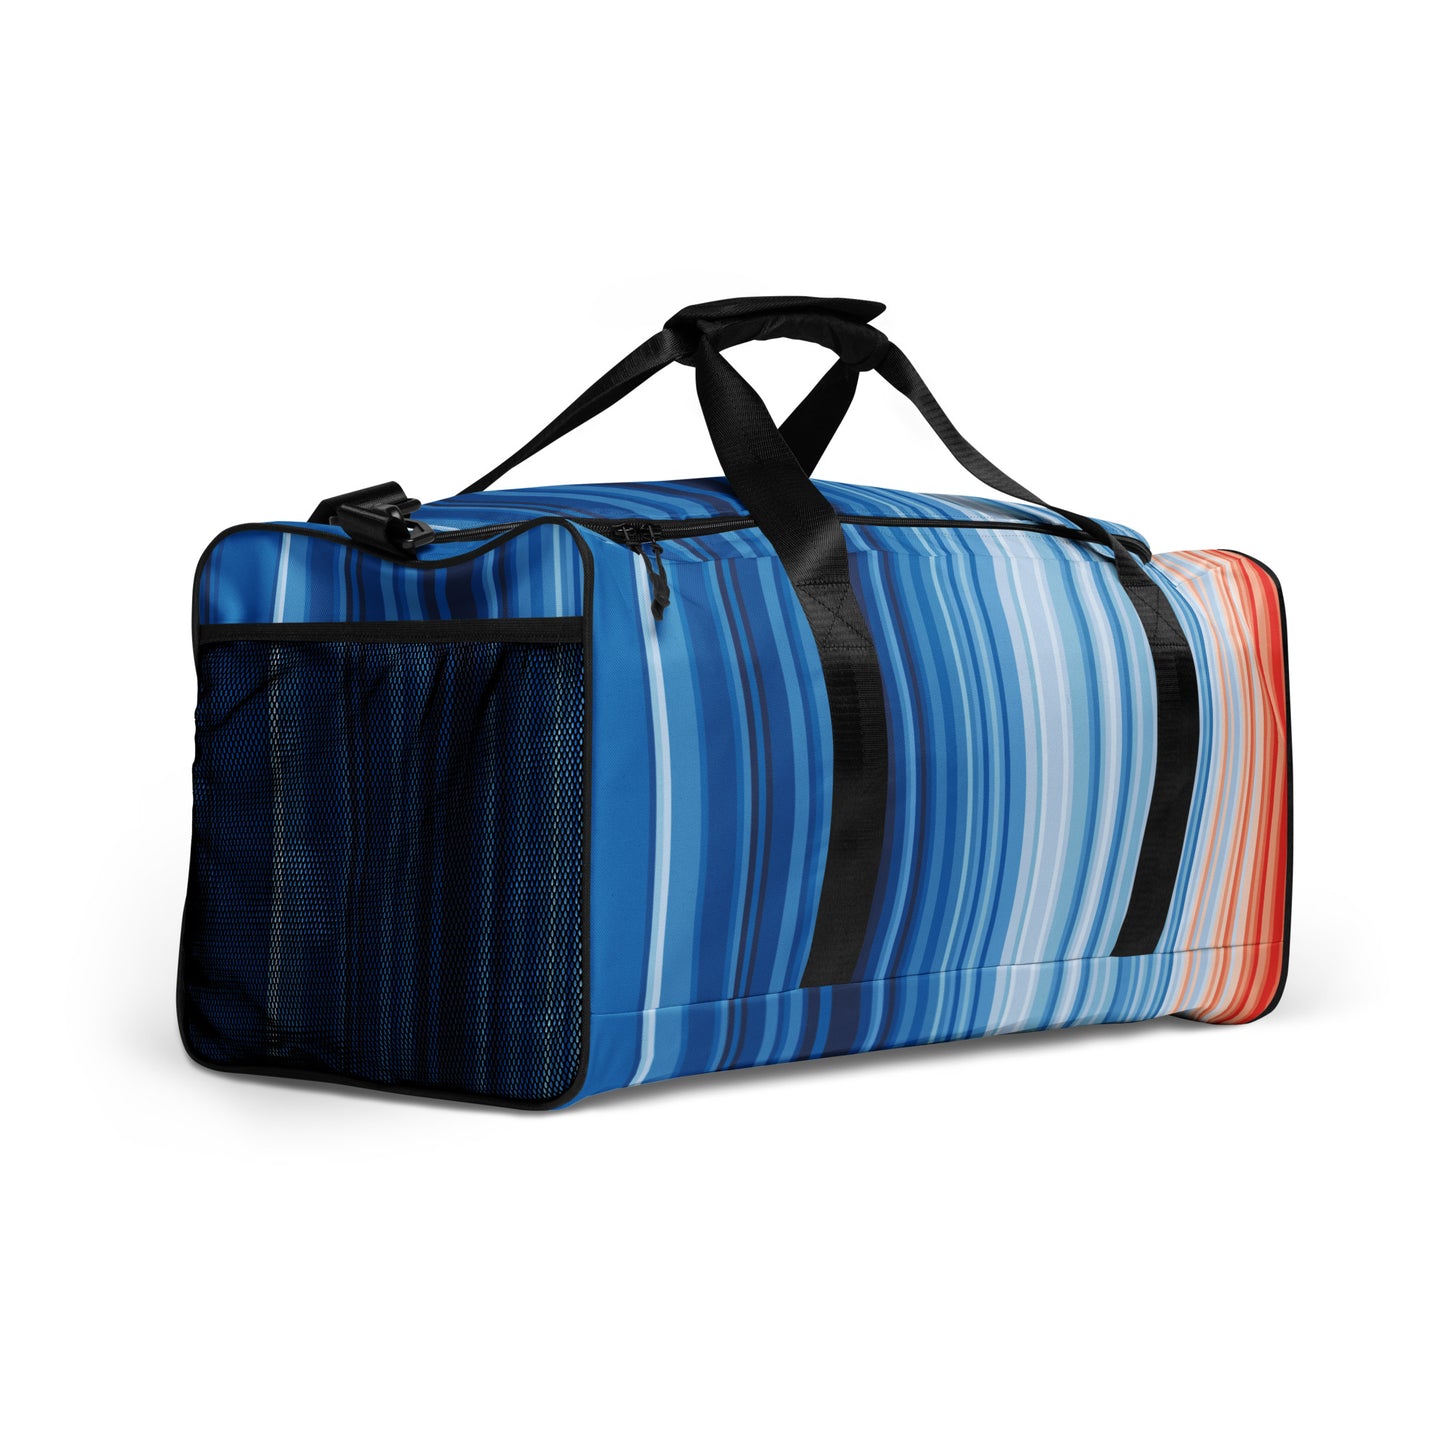 Climate Change Global Warming Stripes - Sustainably Made Duffle Bag